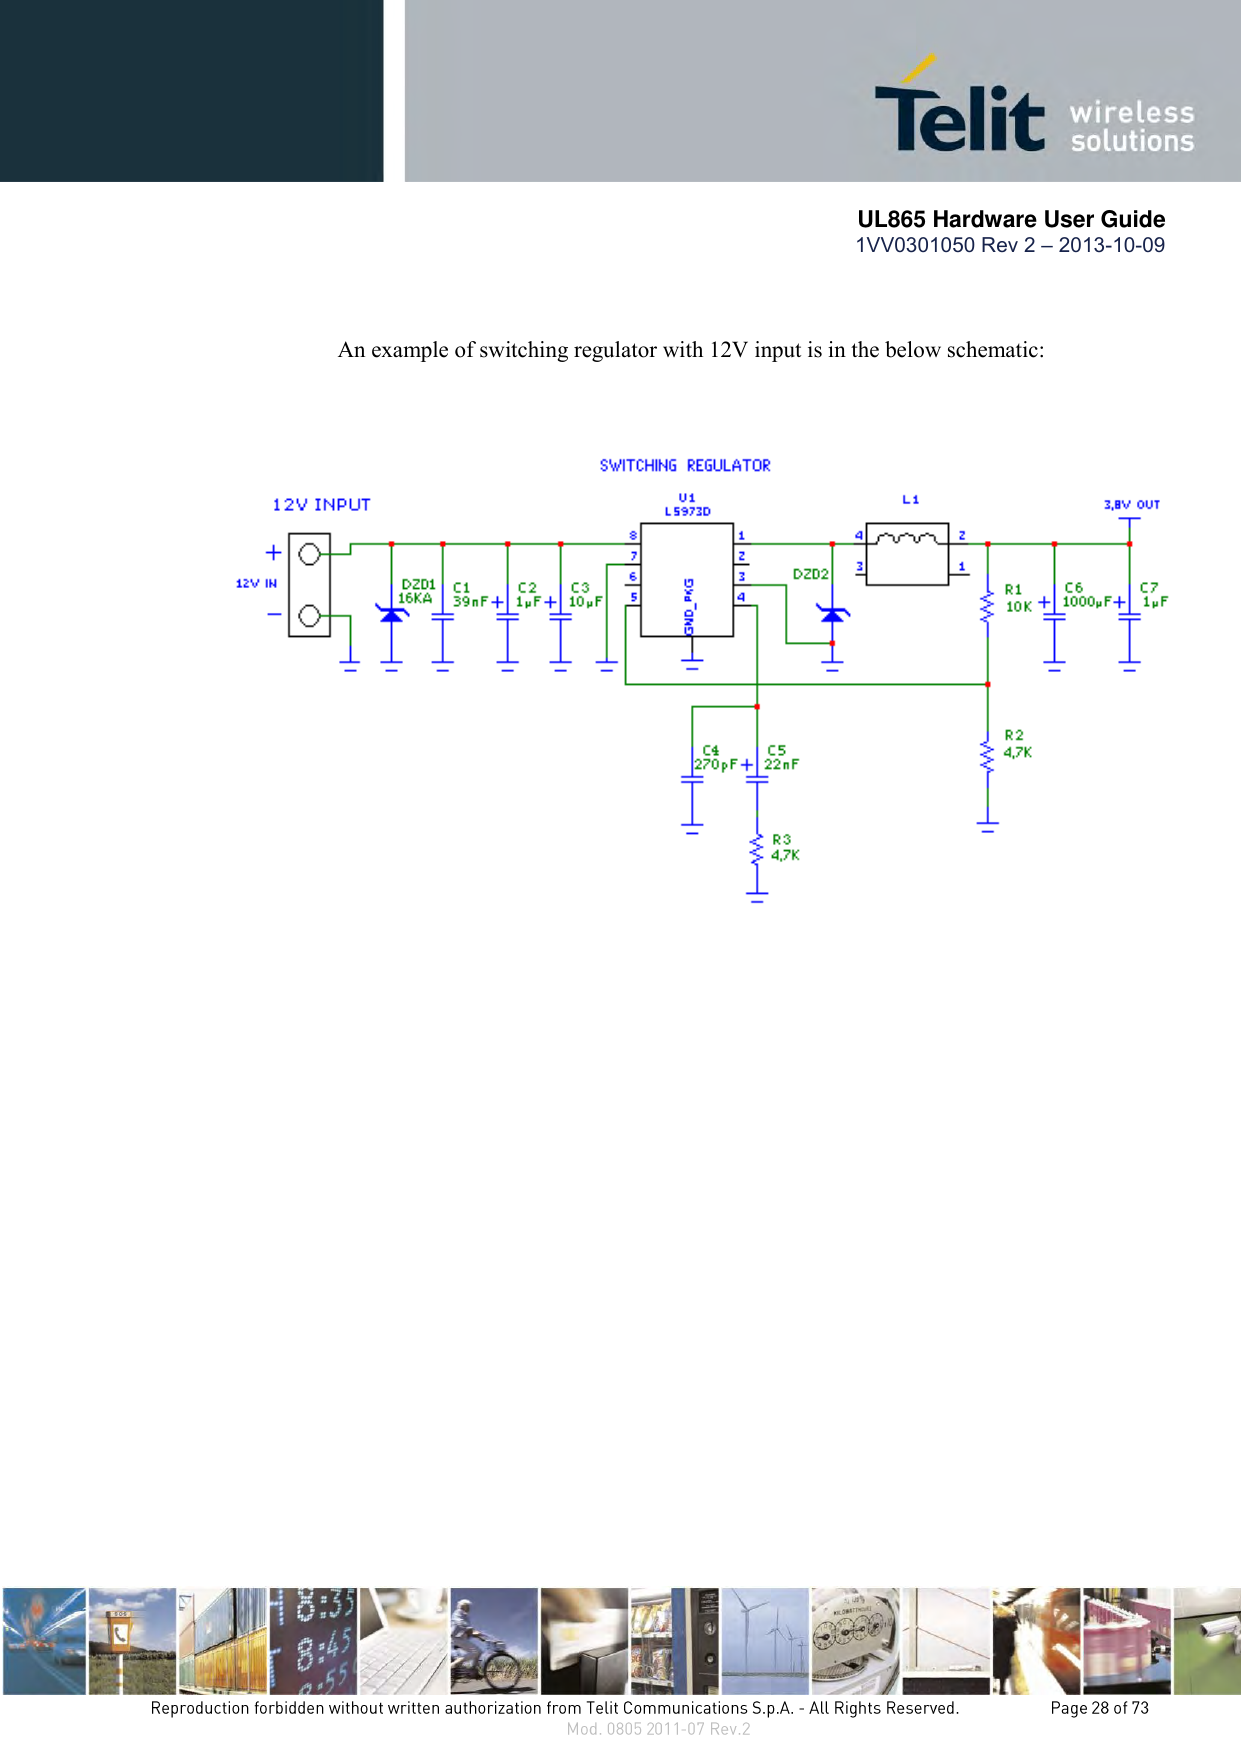       UL865 Hardware User Guide 1VV0301050 Rev 2 – 2013-10-09   An example of switching regulator with 12V input is in the below schematic: 